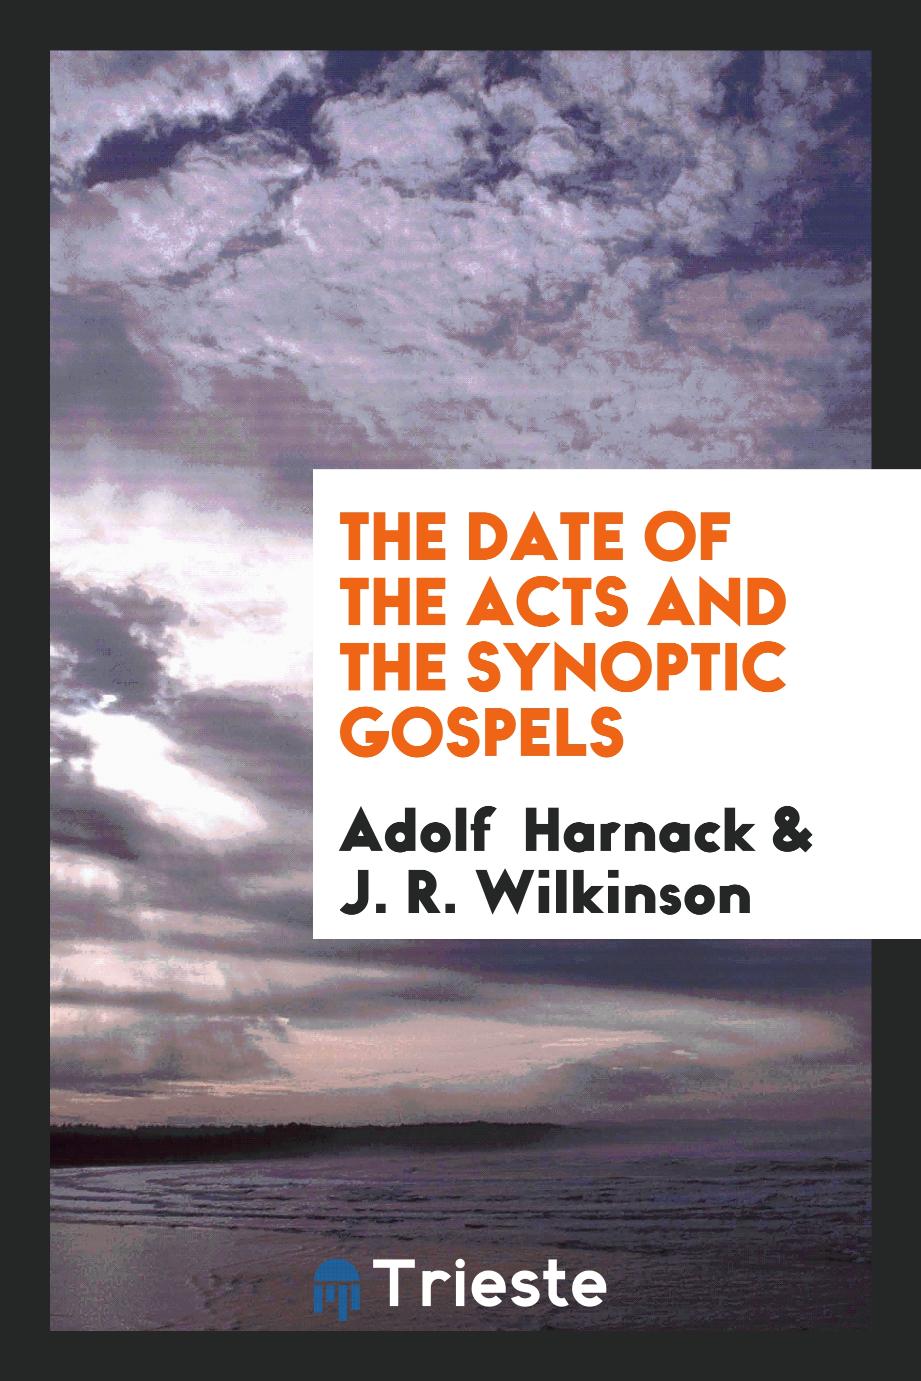 The date of the Acts and the synoptic gospels